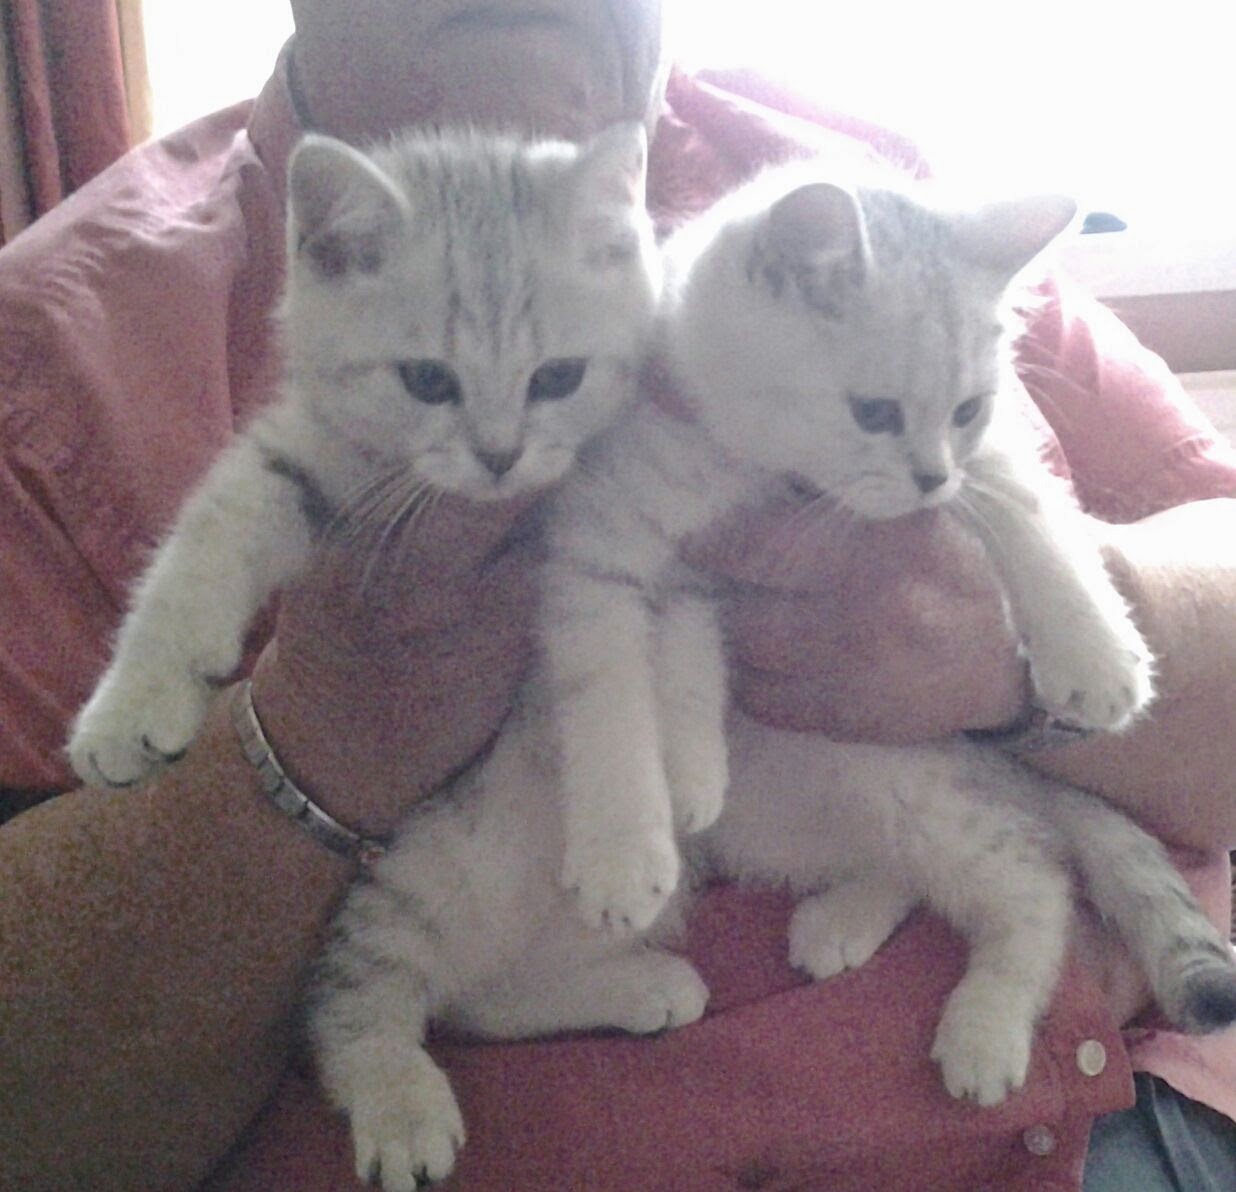 Kuwait Cats and Kittens For Sale Email Us at (fatialima01@gmail.com)